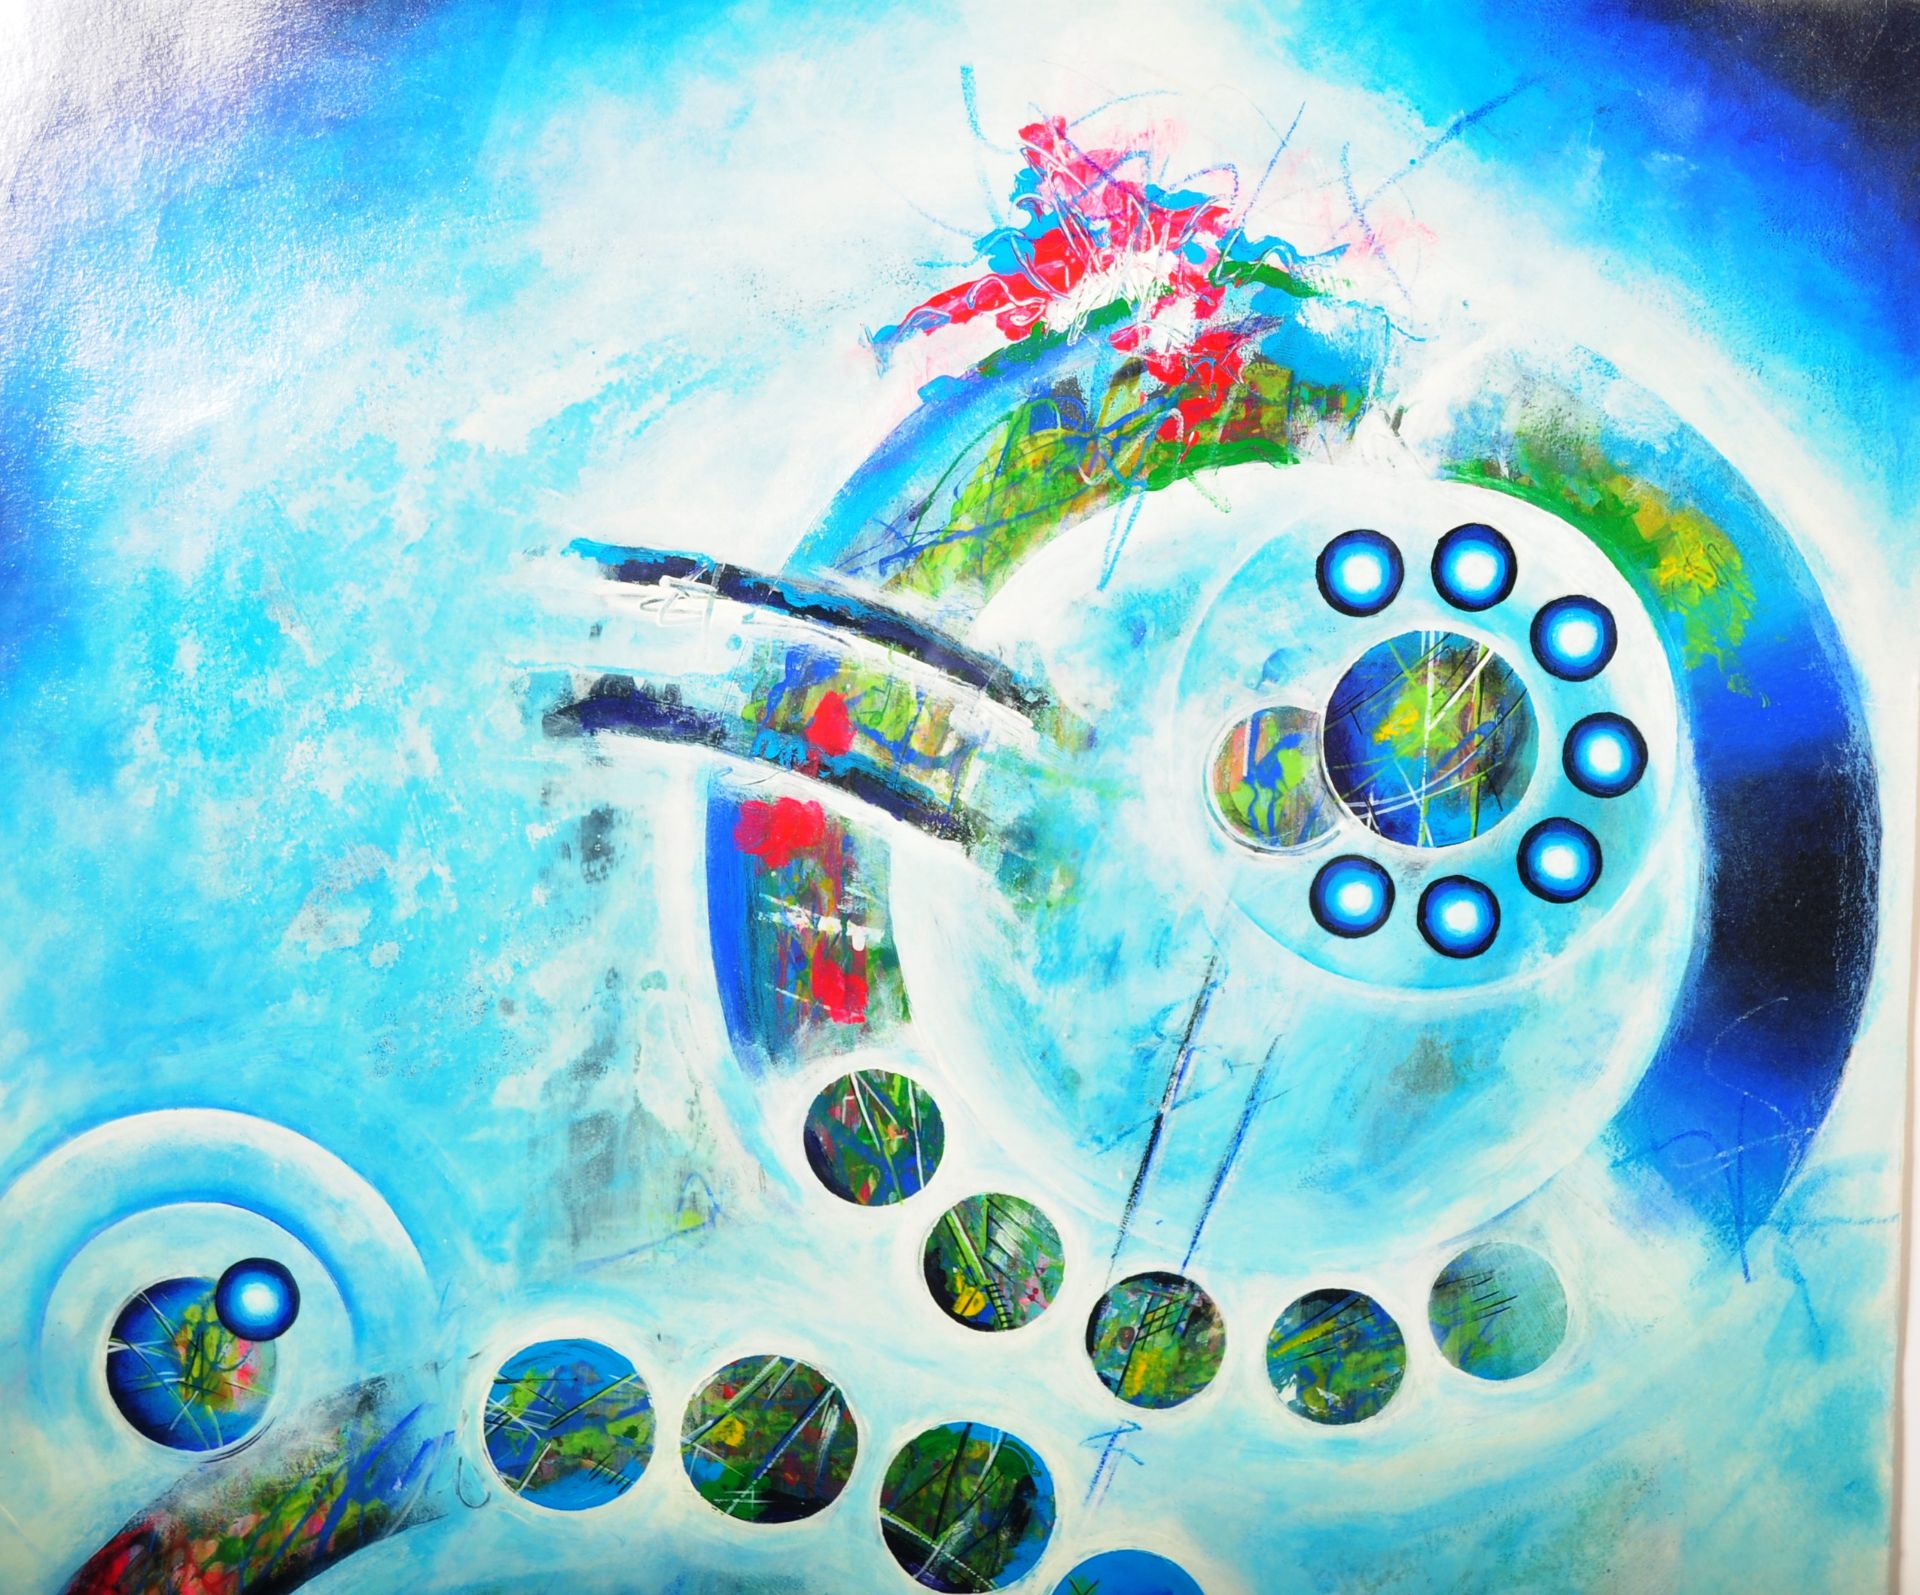 CONTEMPORARY MIXED MEDIA ABSTRACT ART PAINTING DEPICTING PLANETS - Image 2 of 5